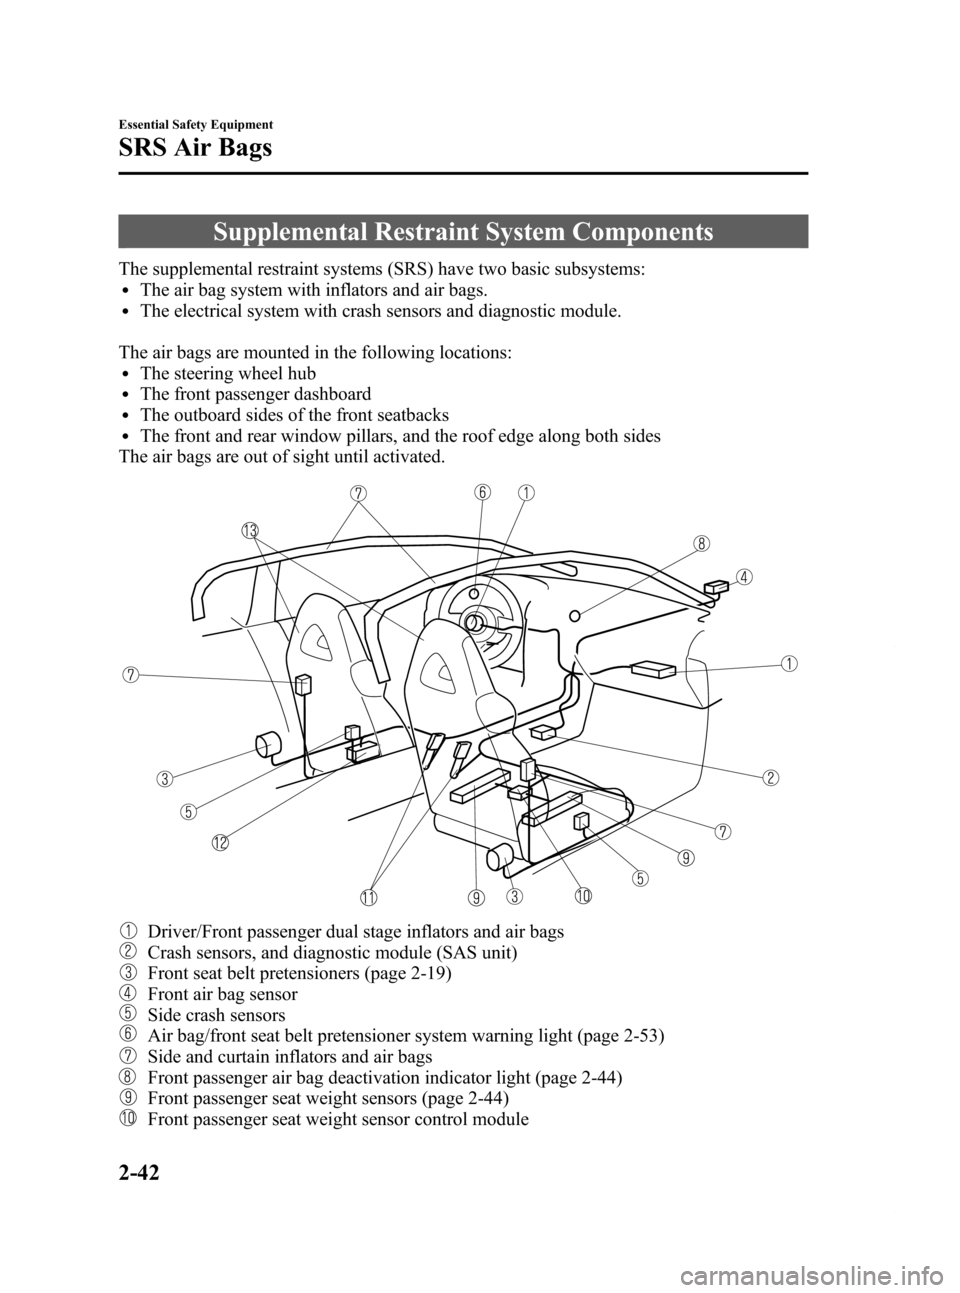 MAZDA MODEL RX 8 2009  Owners Manual (in English) Black plate (54,1)
Supplemental Restraint System Components
The supplemental restraint systems (SRS) have two basic subsystems:lThe air bag system with inflators and air bags.lThe electrical system wi